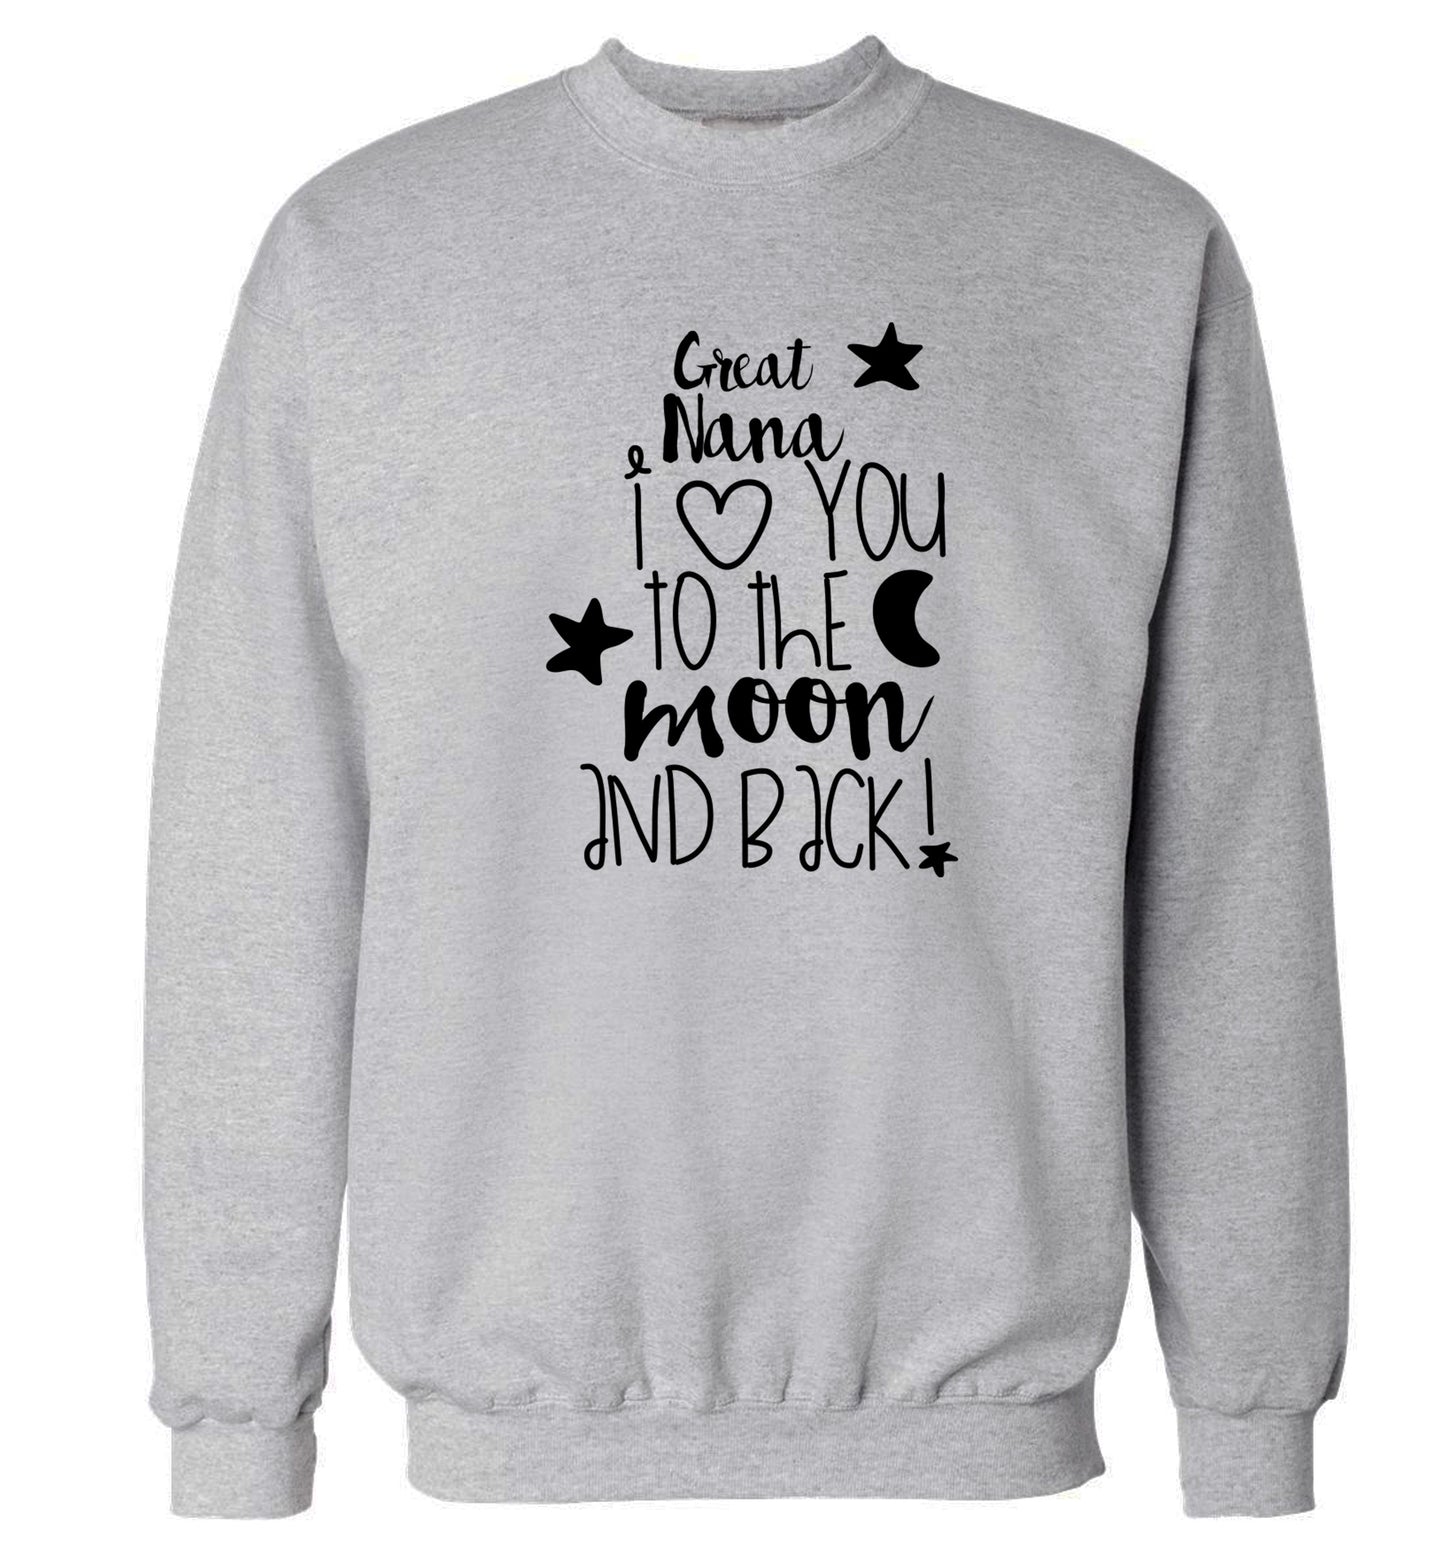 Great Nana I love you to the moon and back Adult's unisex grey  sweater 2XL